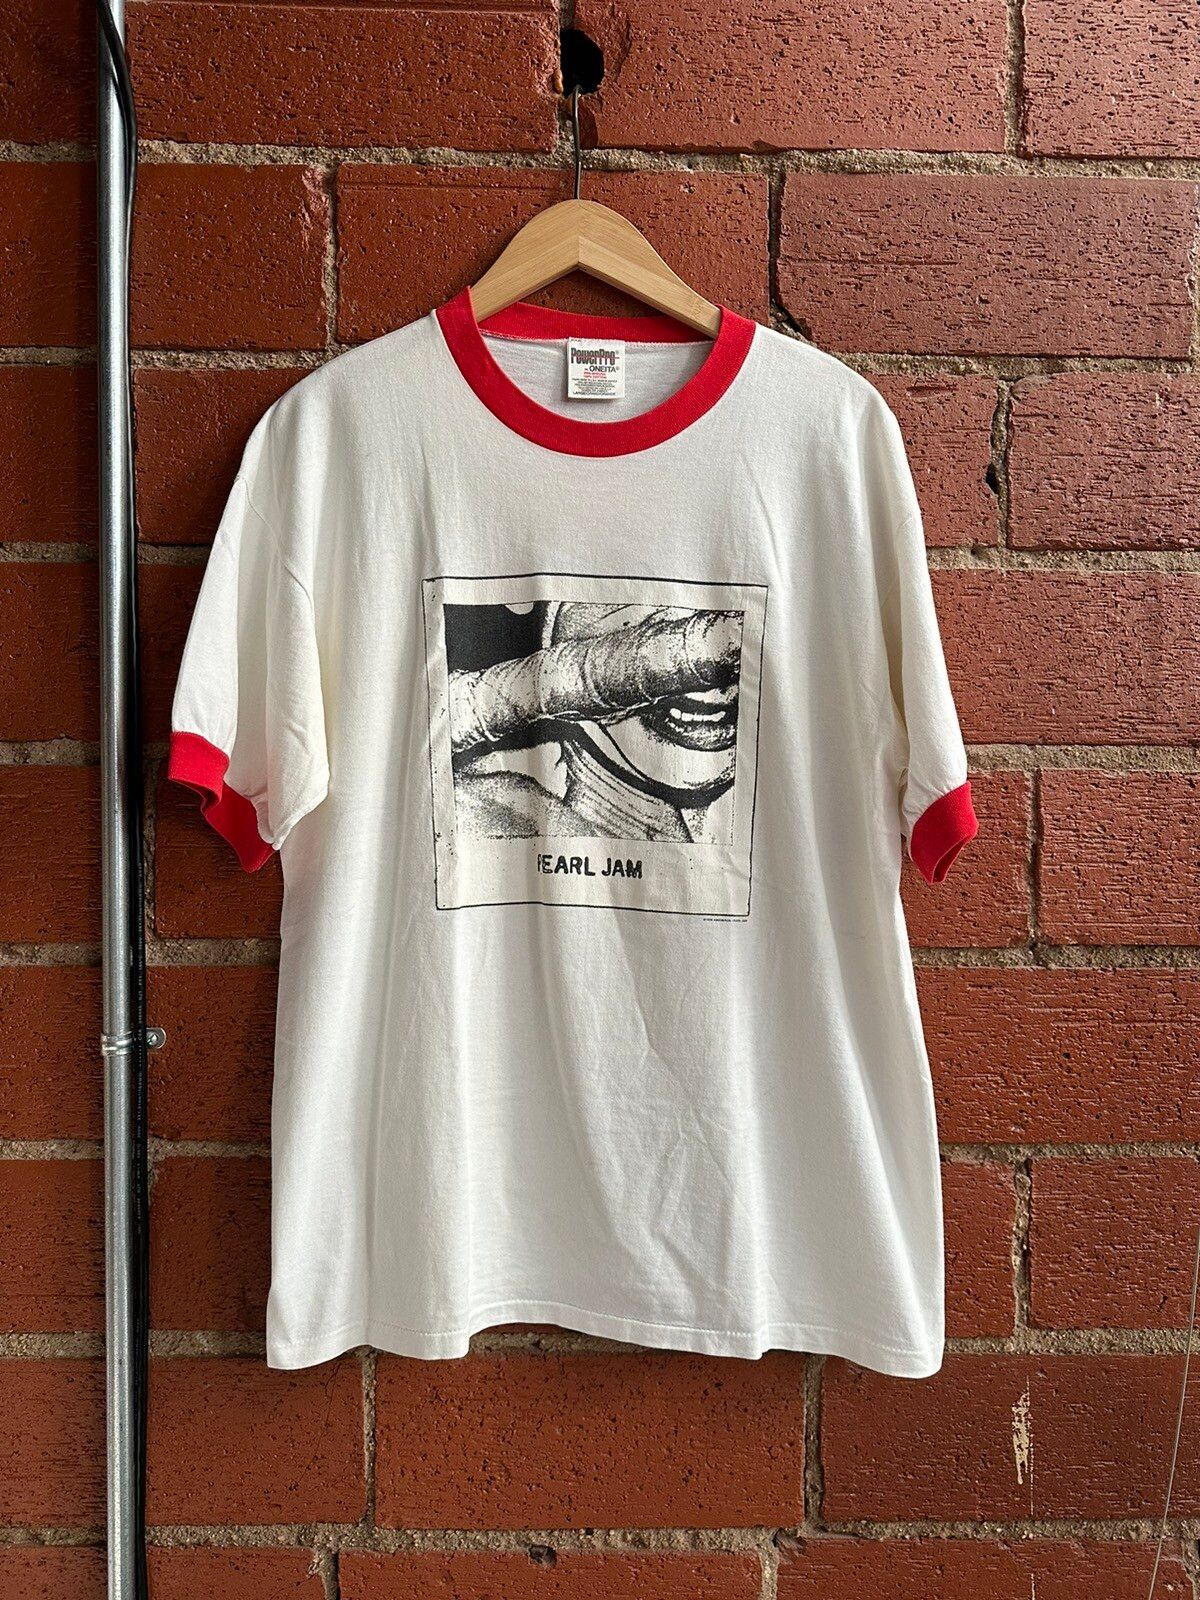 Vintage Vintage 1996 Pearl Jam Ringer Tee Very Rare Seattle WA Date Size US L / EU 52-54 / 3 - 1 Preview